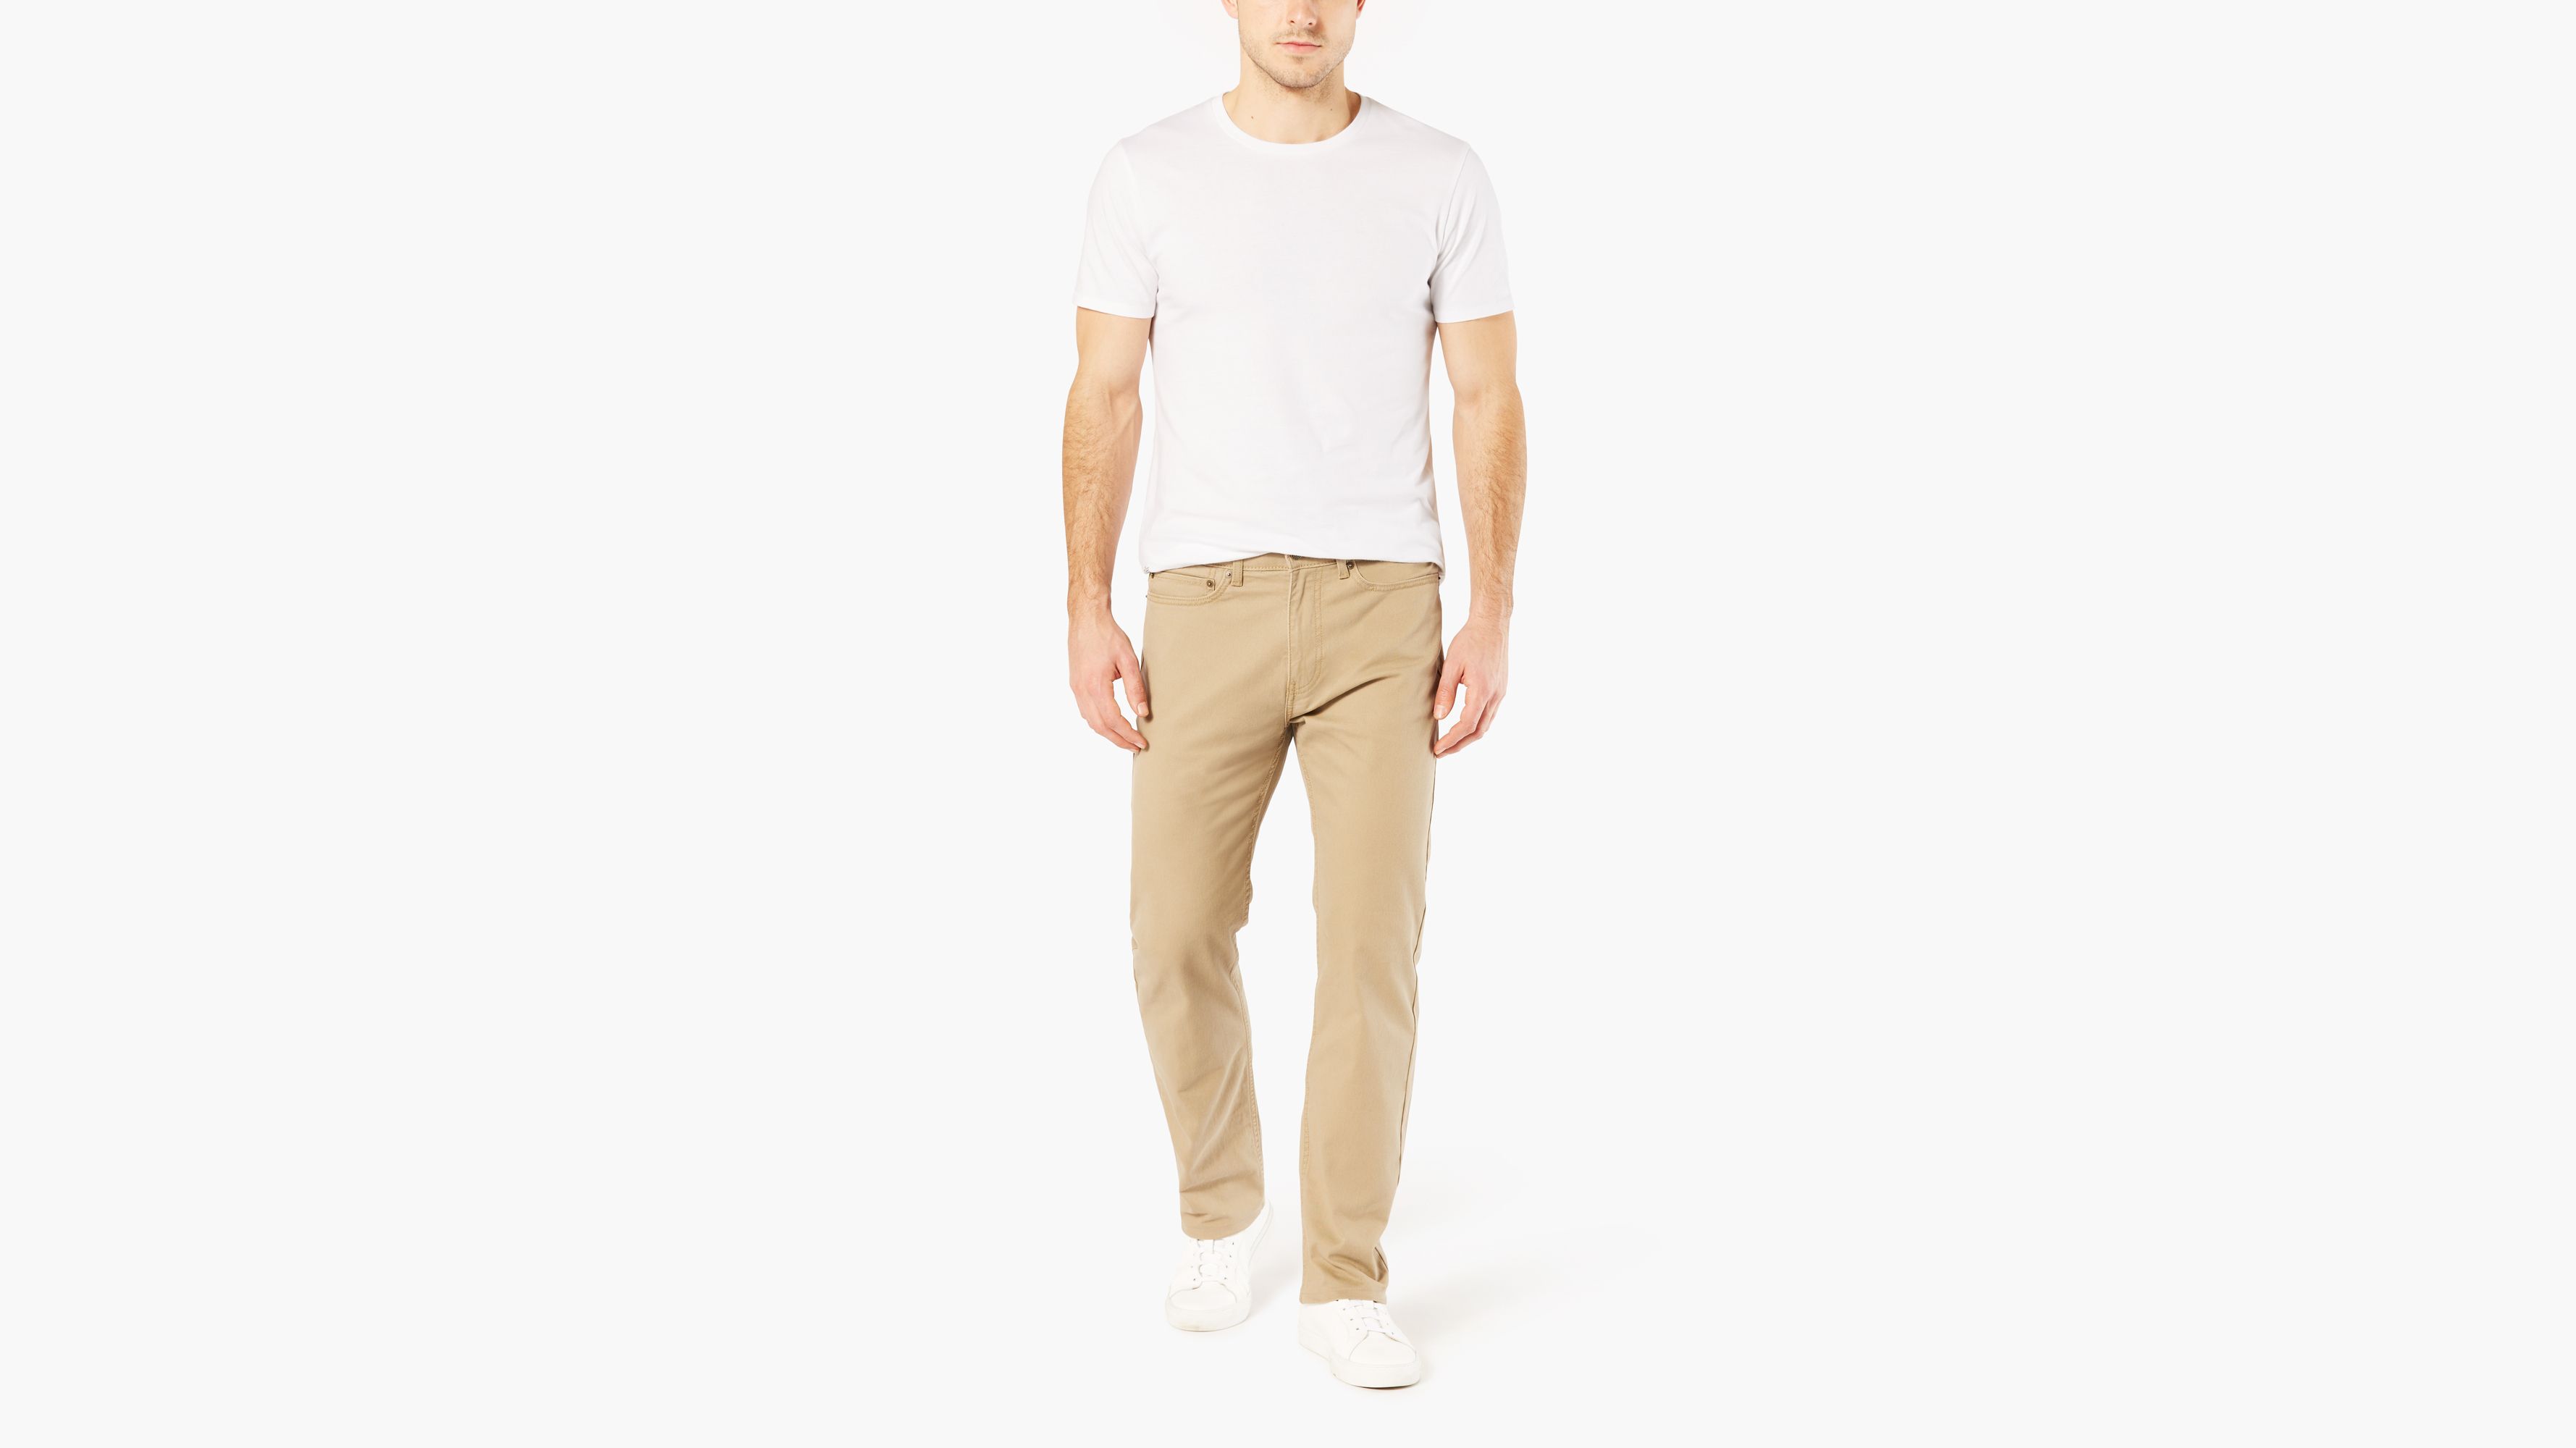 Men's Clothing - Classic, Casual Clothes for Men | Dockers® US